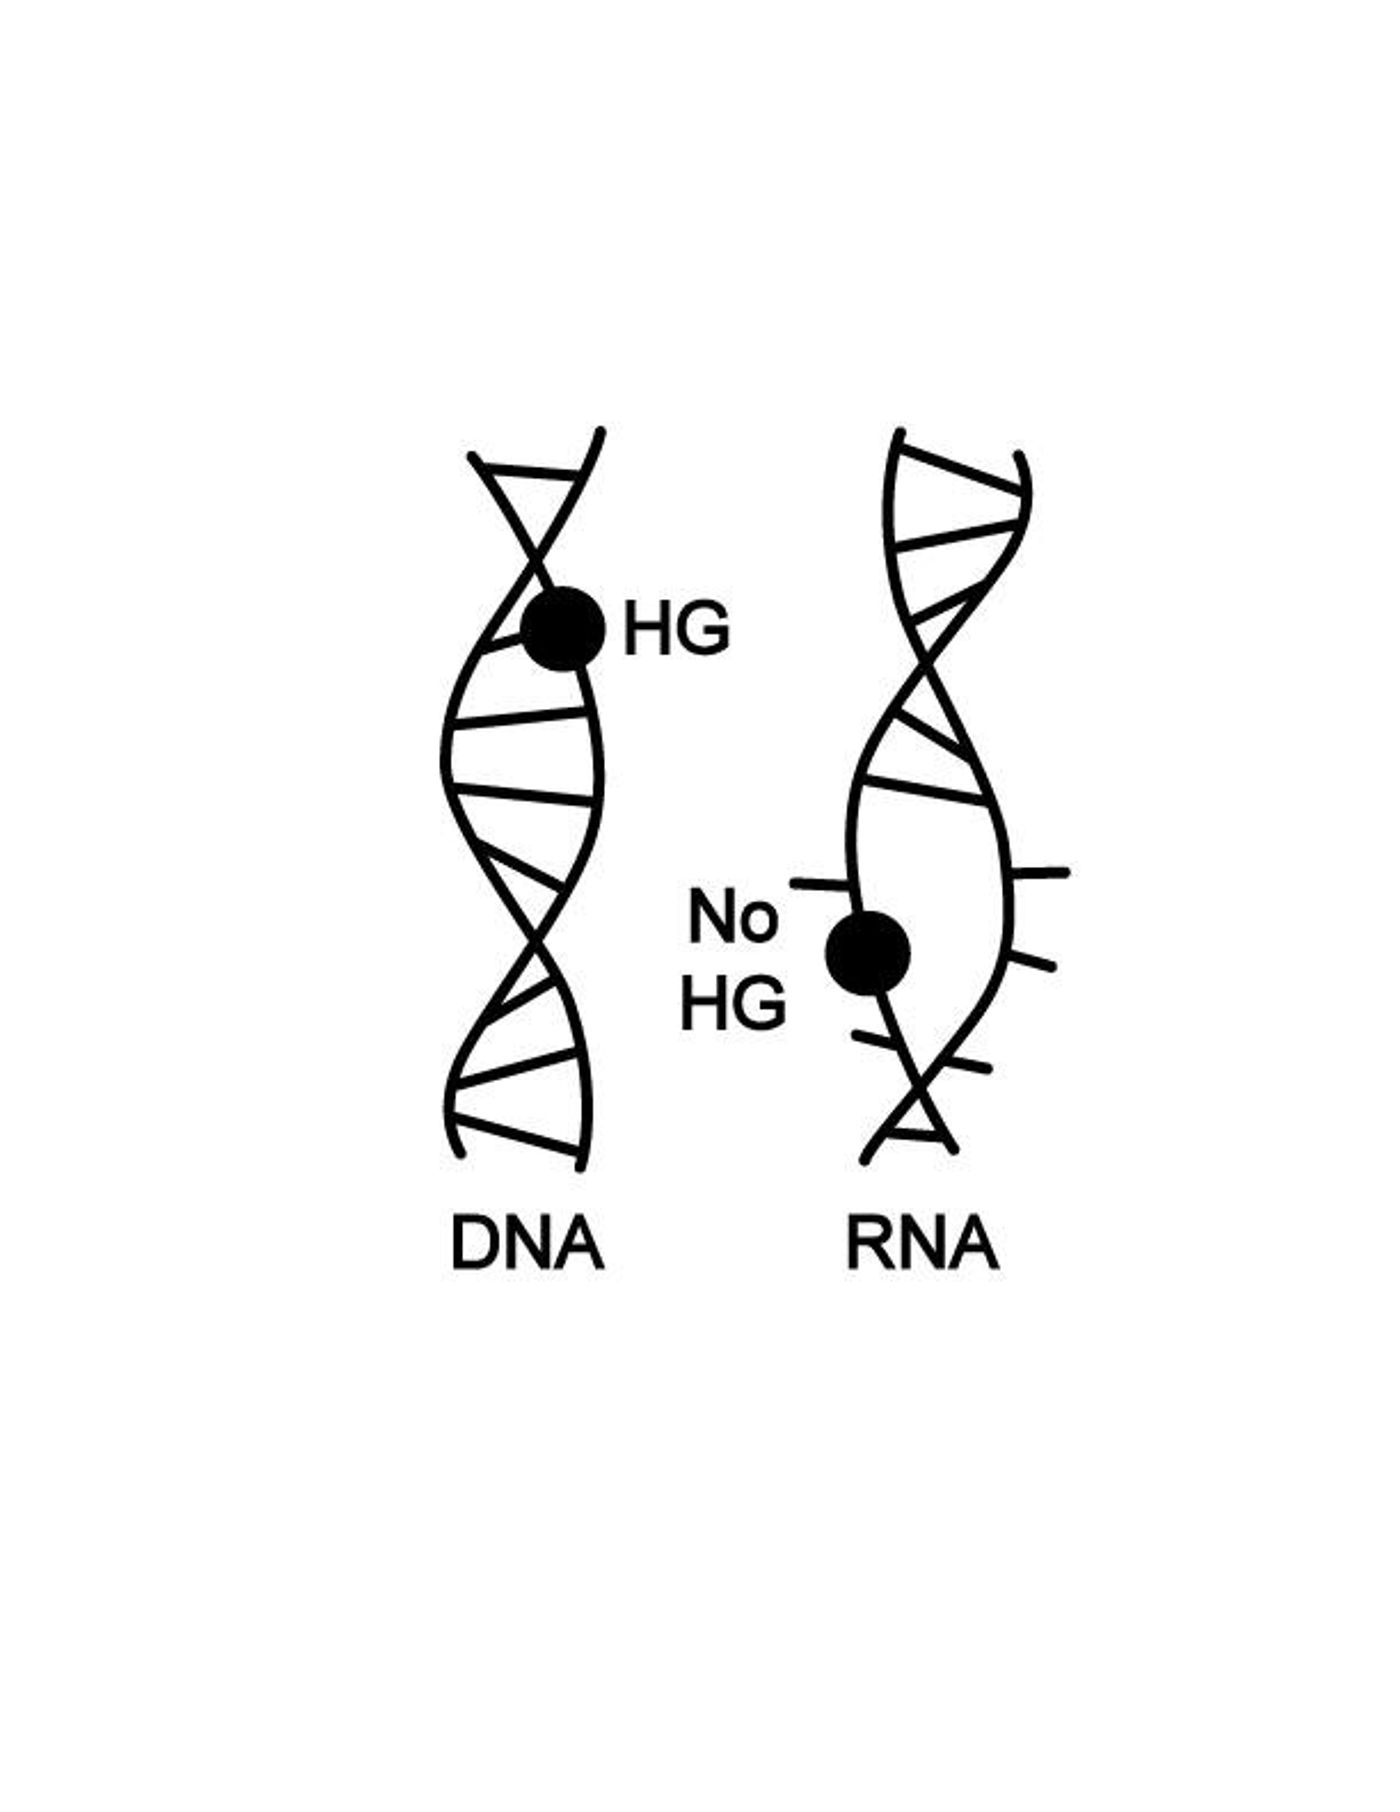 The DNA double helix can contort into different shapes to absorb chemical damage to the basic building blocks (A, G, C and T, depicted by black dot) of genetic code. An RNA double helix is so rigid and unyielding that rather than accommodating damaged bases, it falls apart completely.